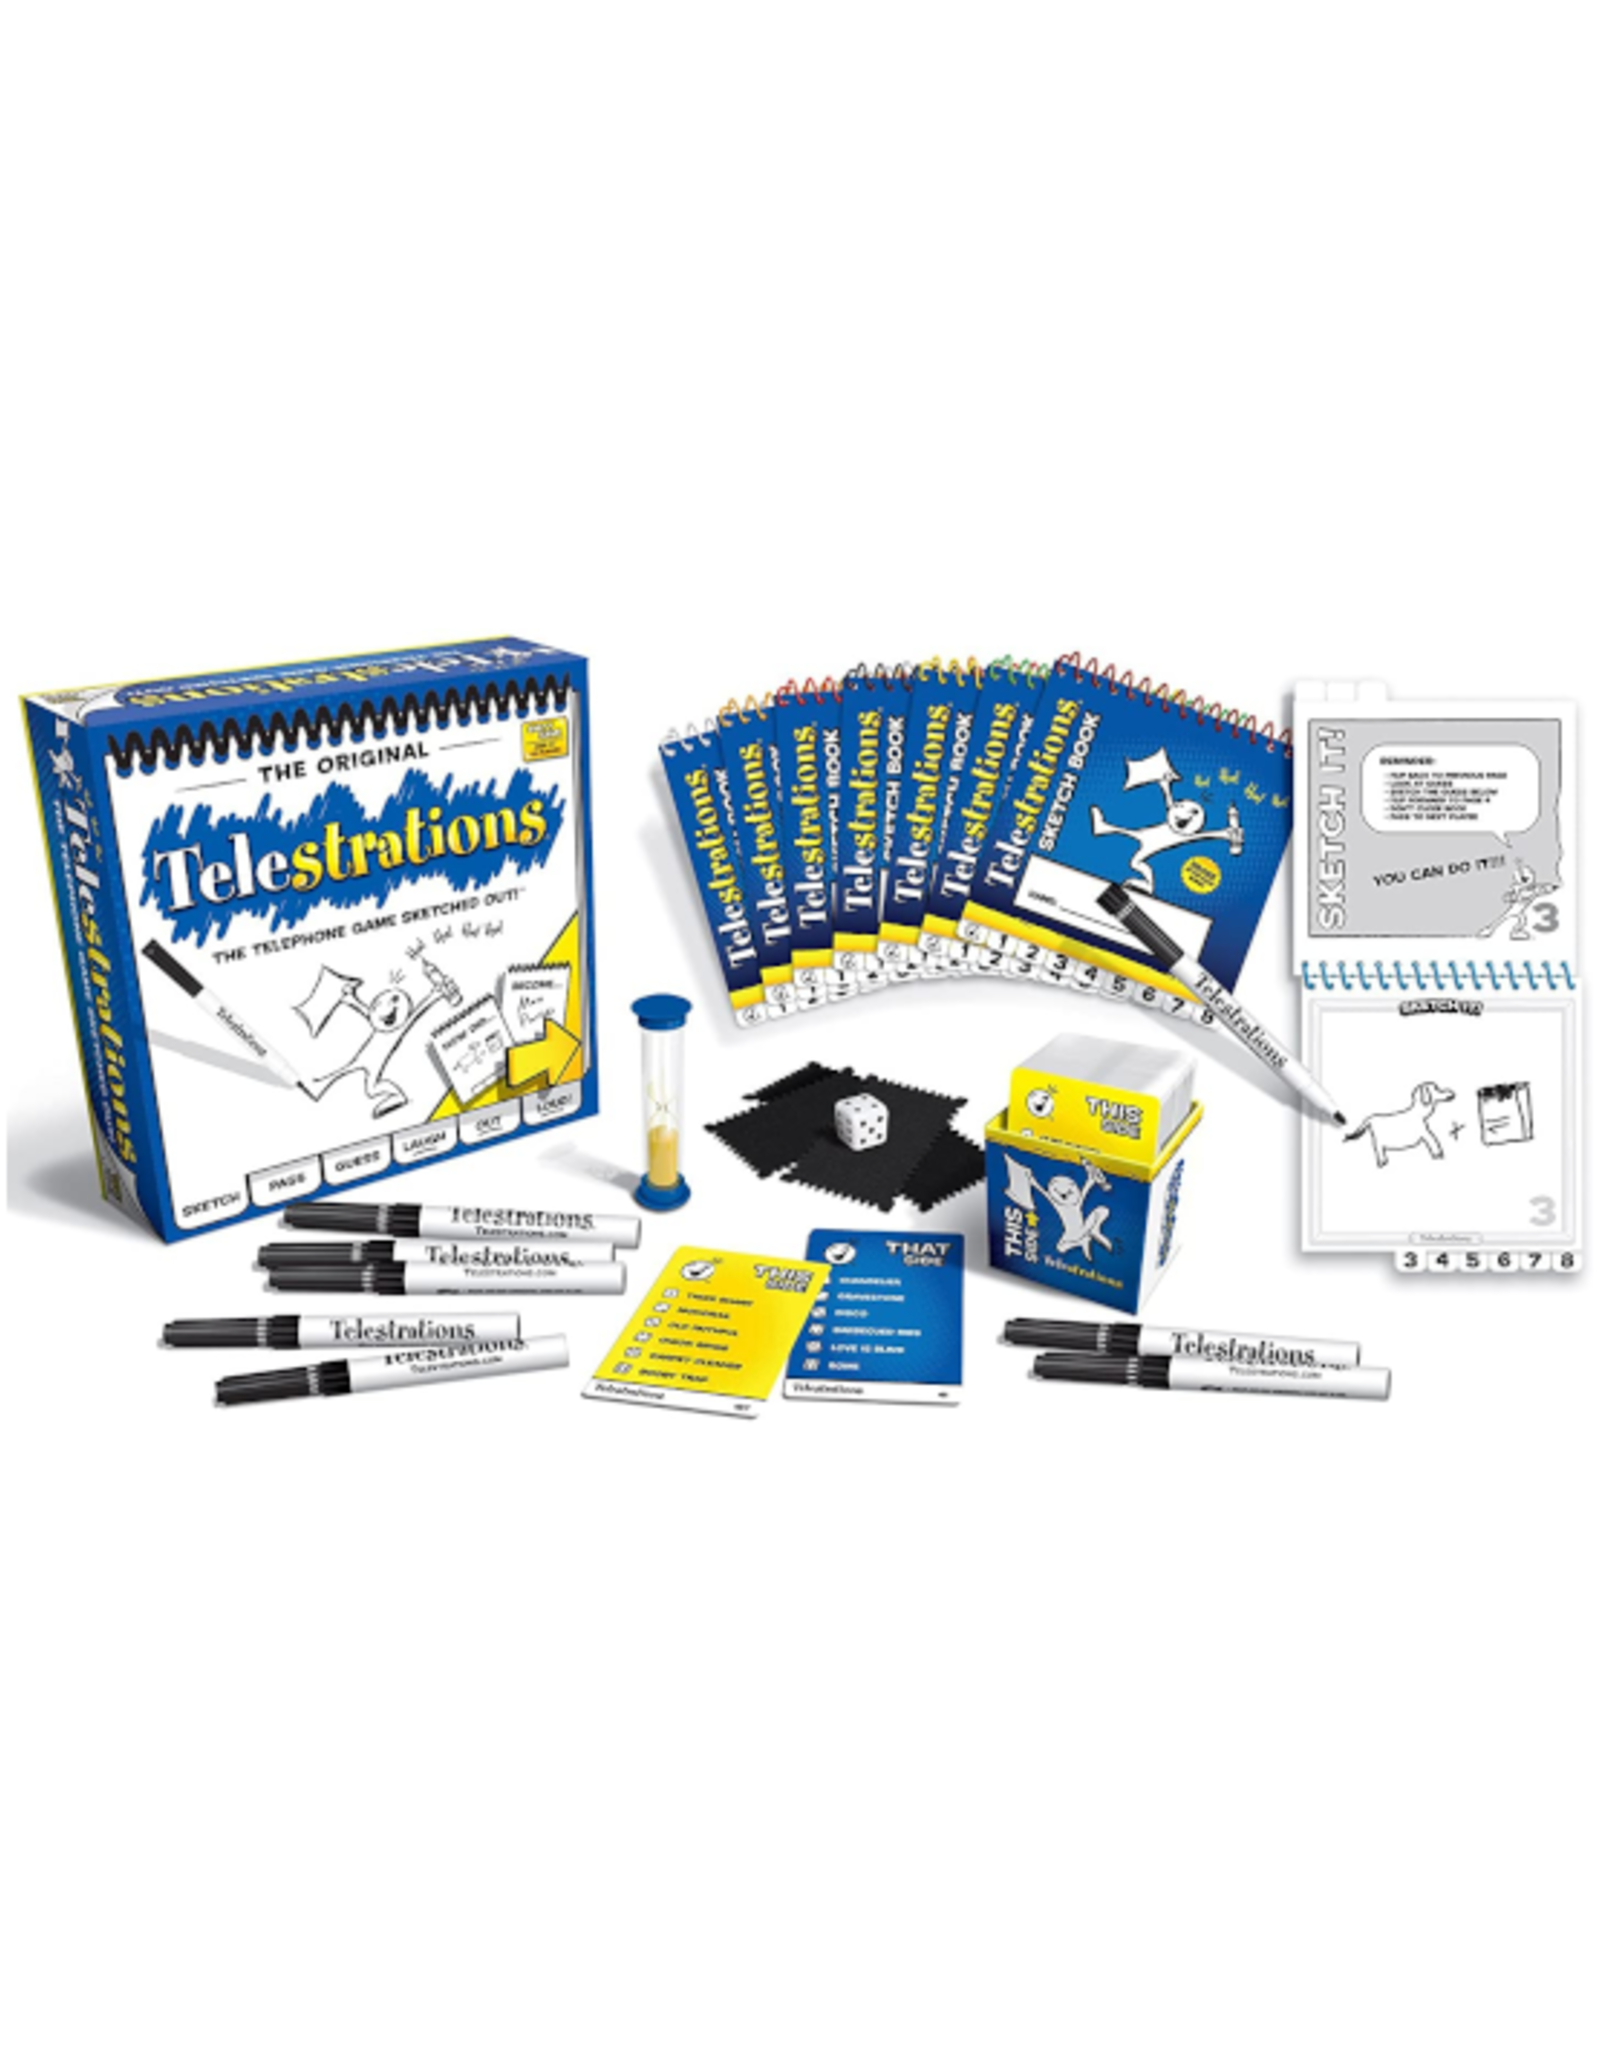 USAopoly Telestrations - The Original